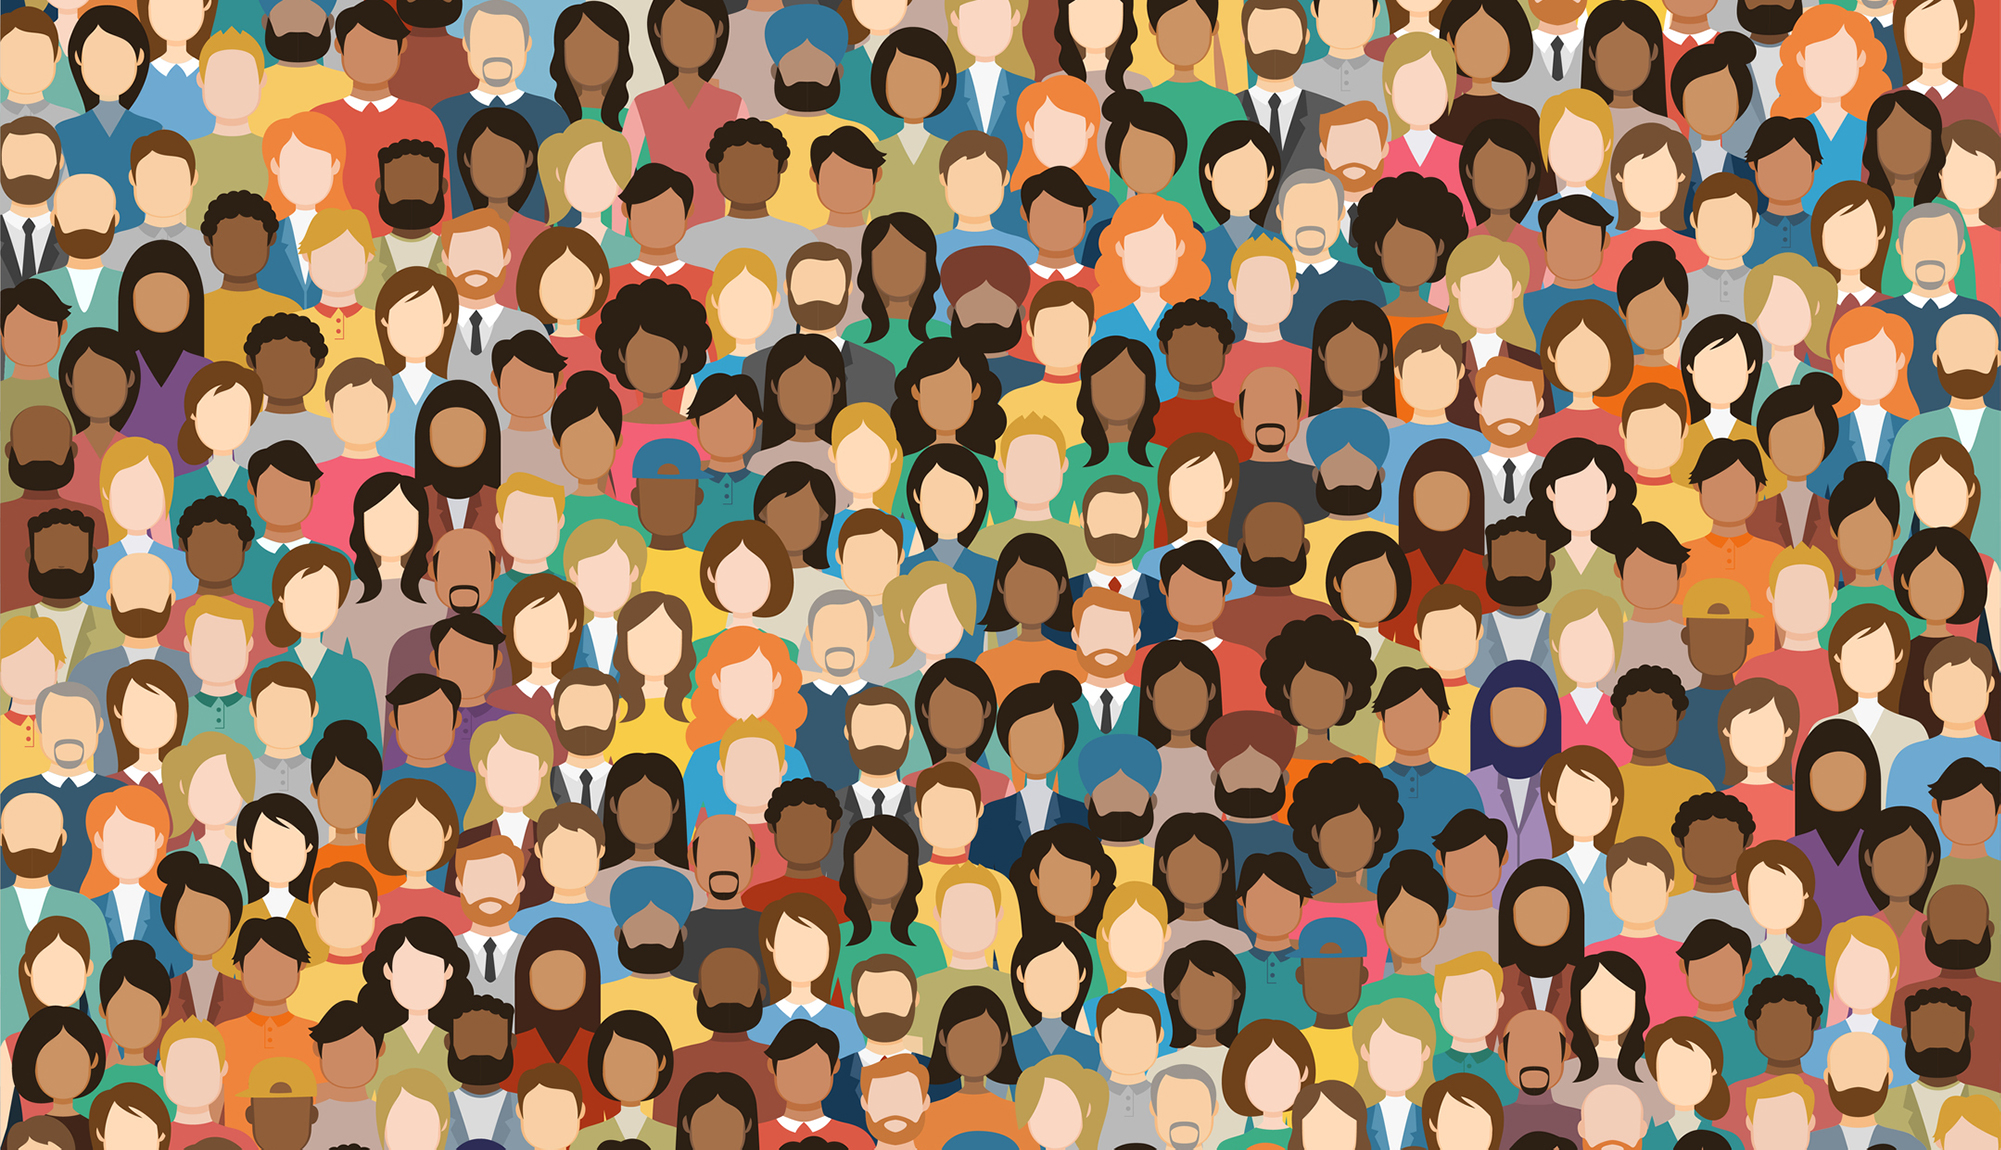 An illustration of more than 50 human faces, depicting a variety of genders, races and religions